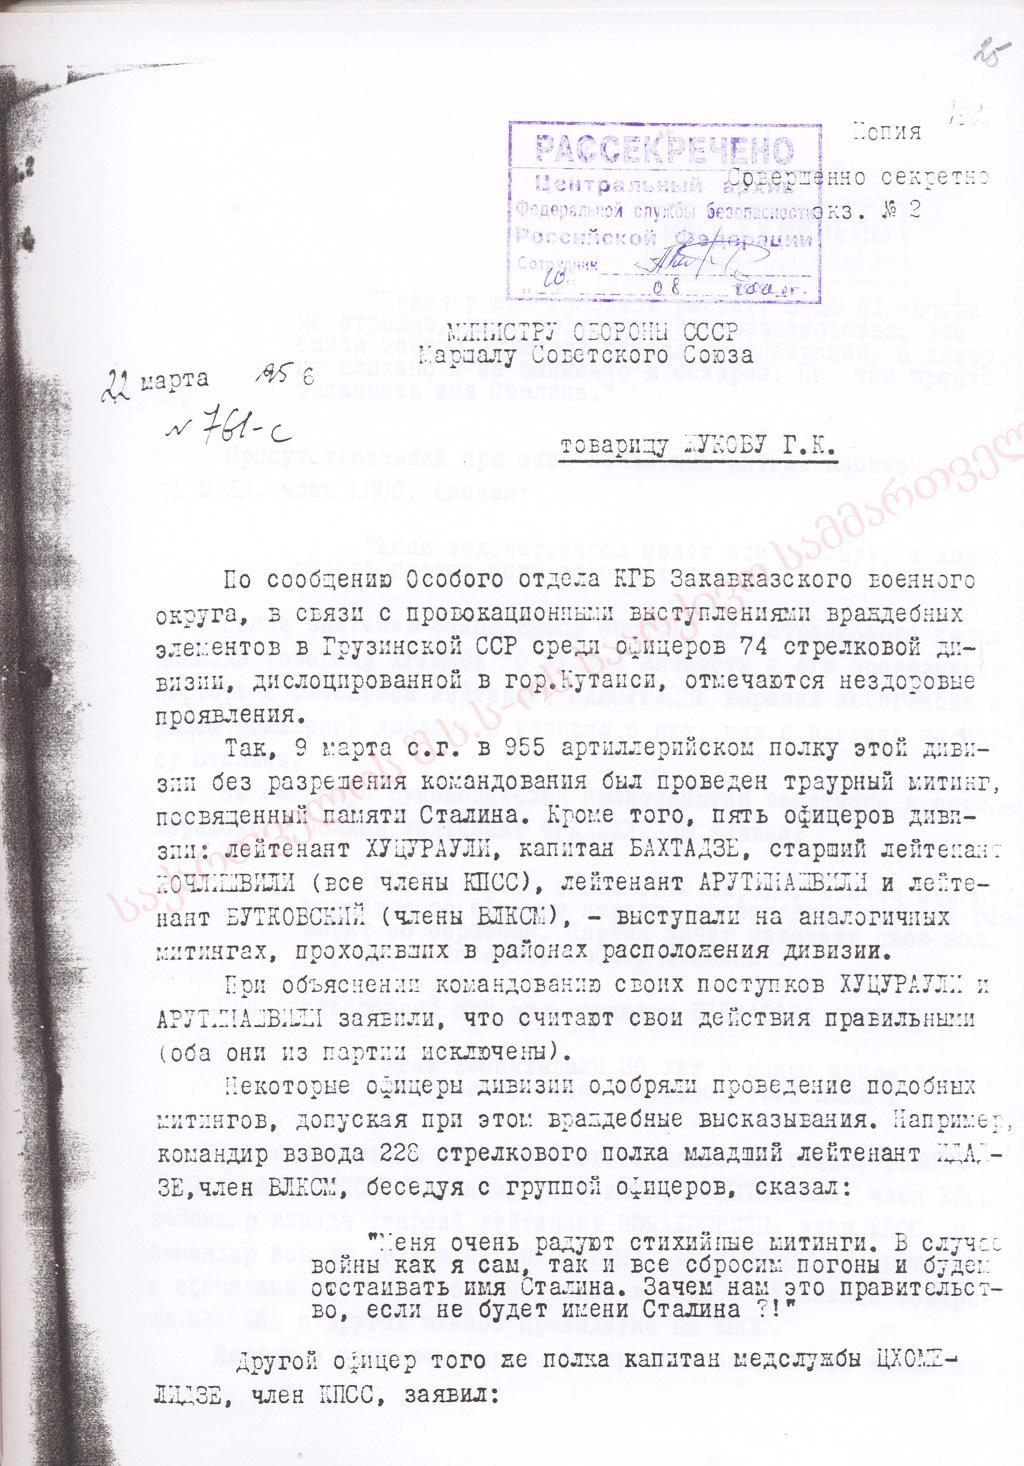 Informational Letter from Army General I. Serov, Chairman of the Committee for State Security at the Council of Ministers of the USSR, addressed to the Marshal  G. Zhukov, Minister of Defense of the USSR.